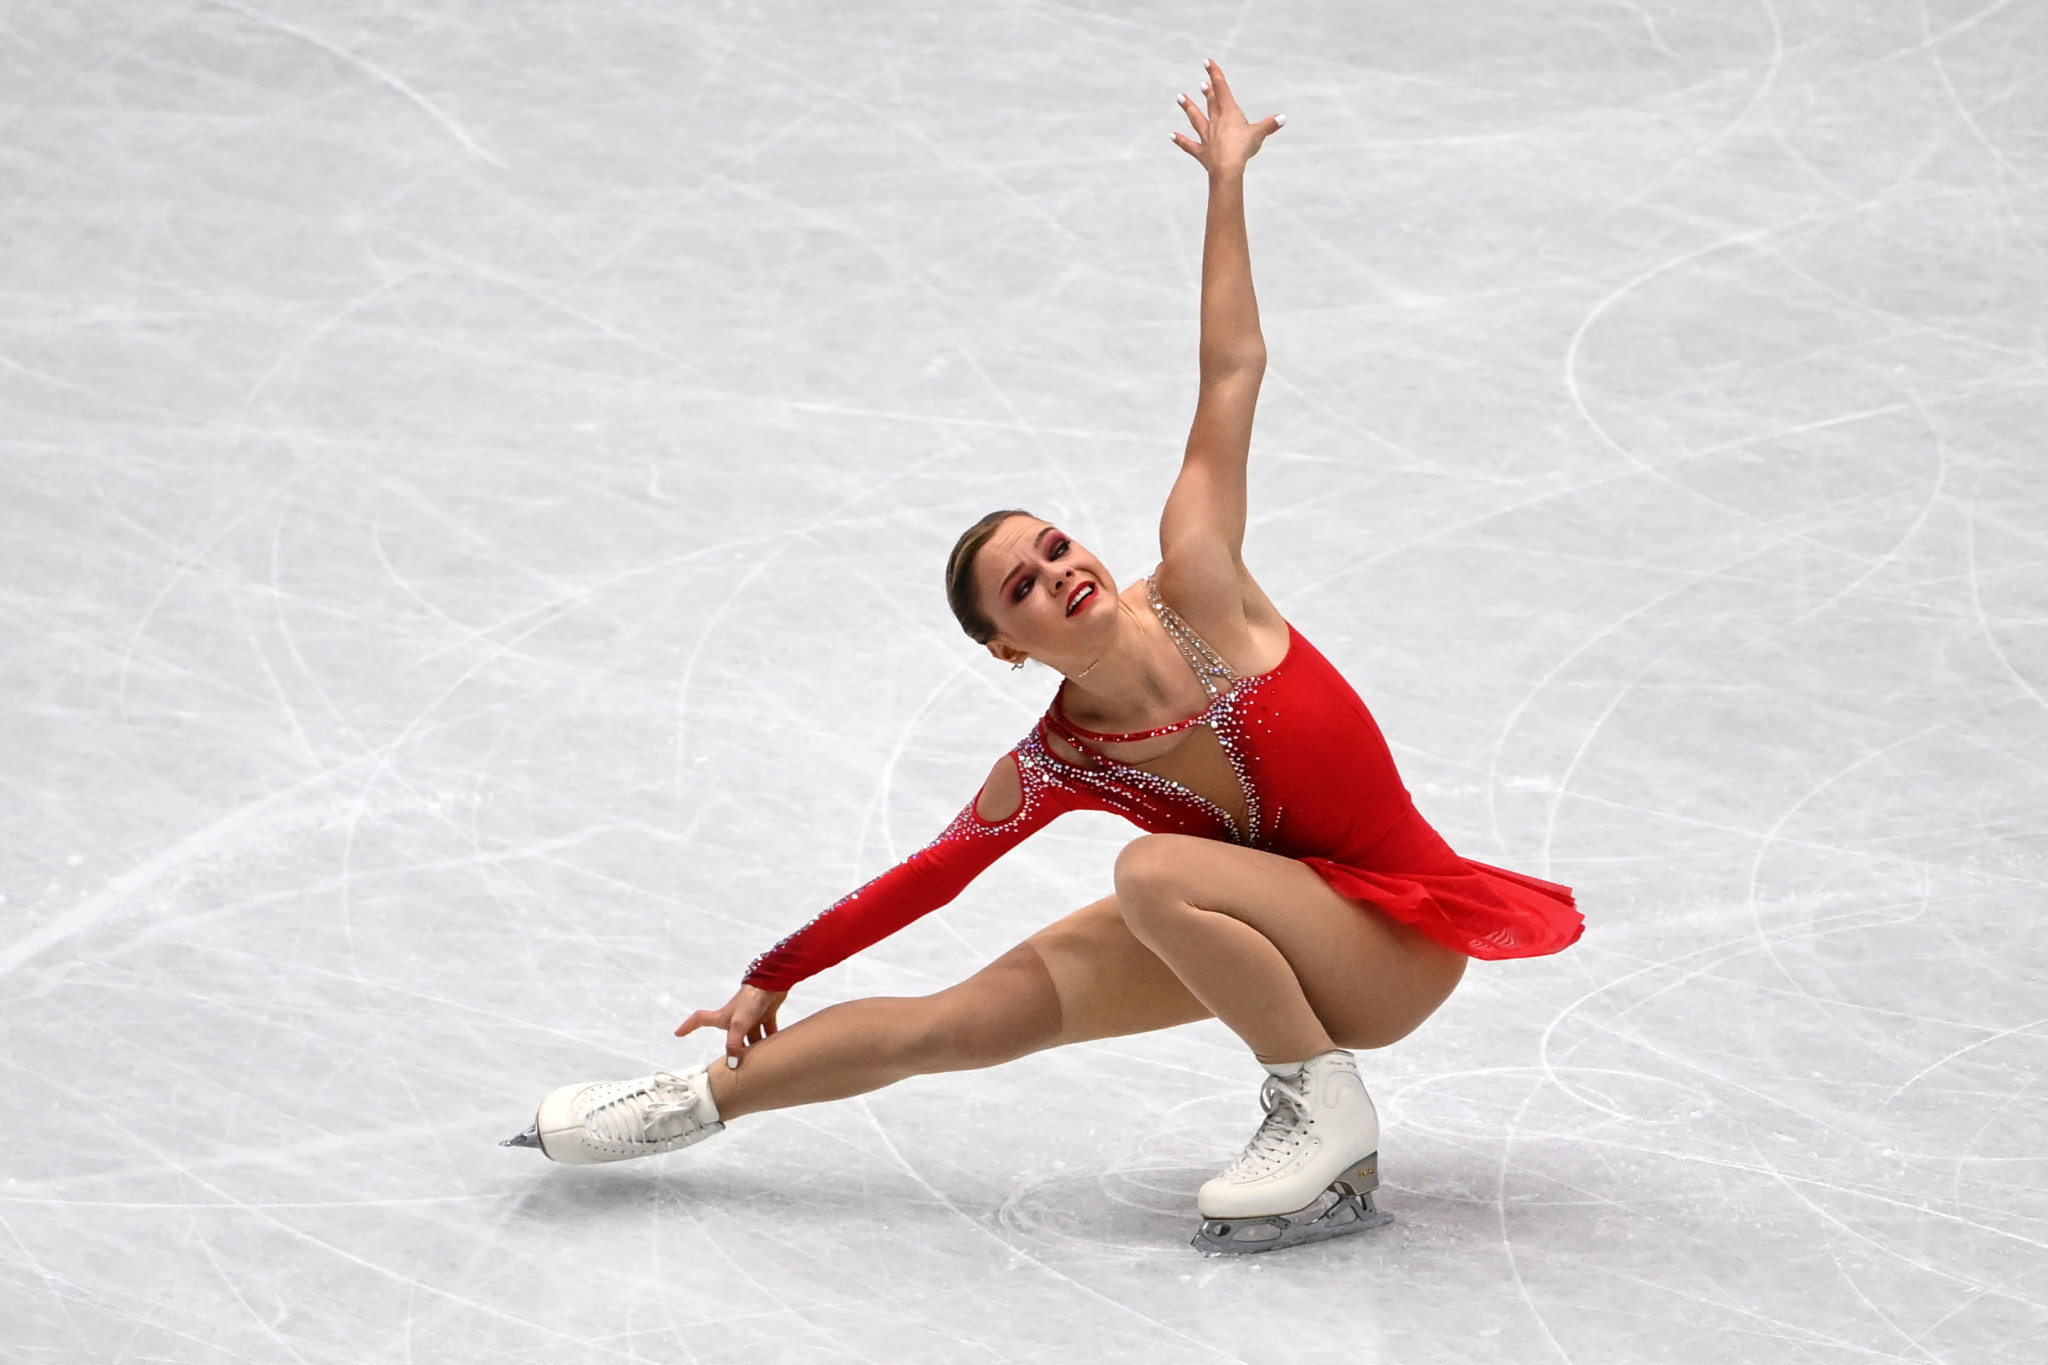 Loena Hendrickx leads the women's event after winning the short programme at the ISU Grand Prix de France in Angers ©Getty Images